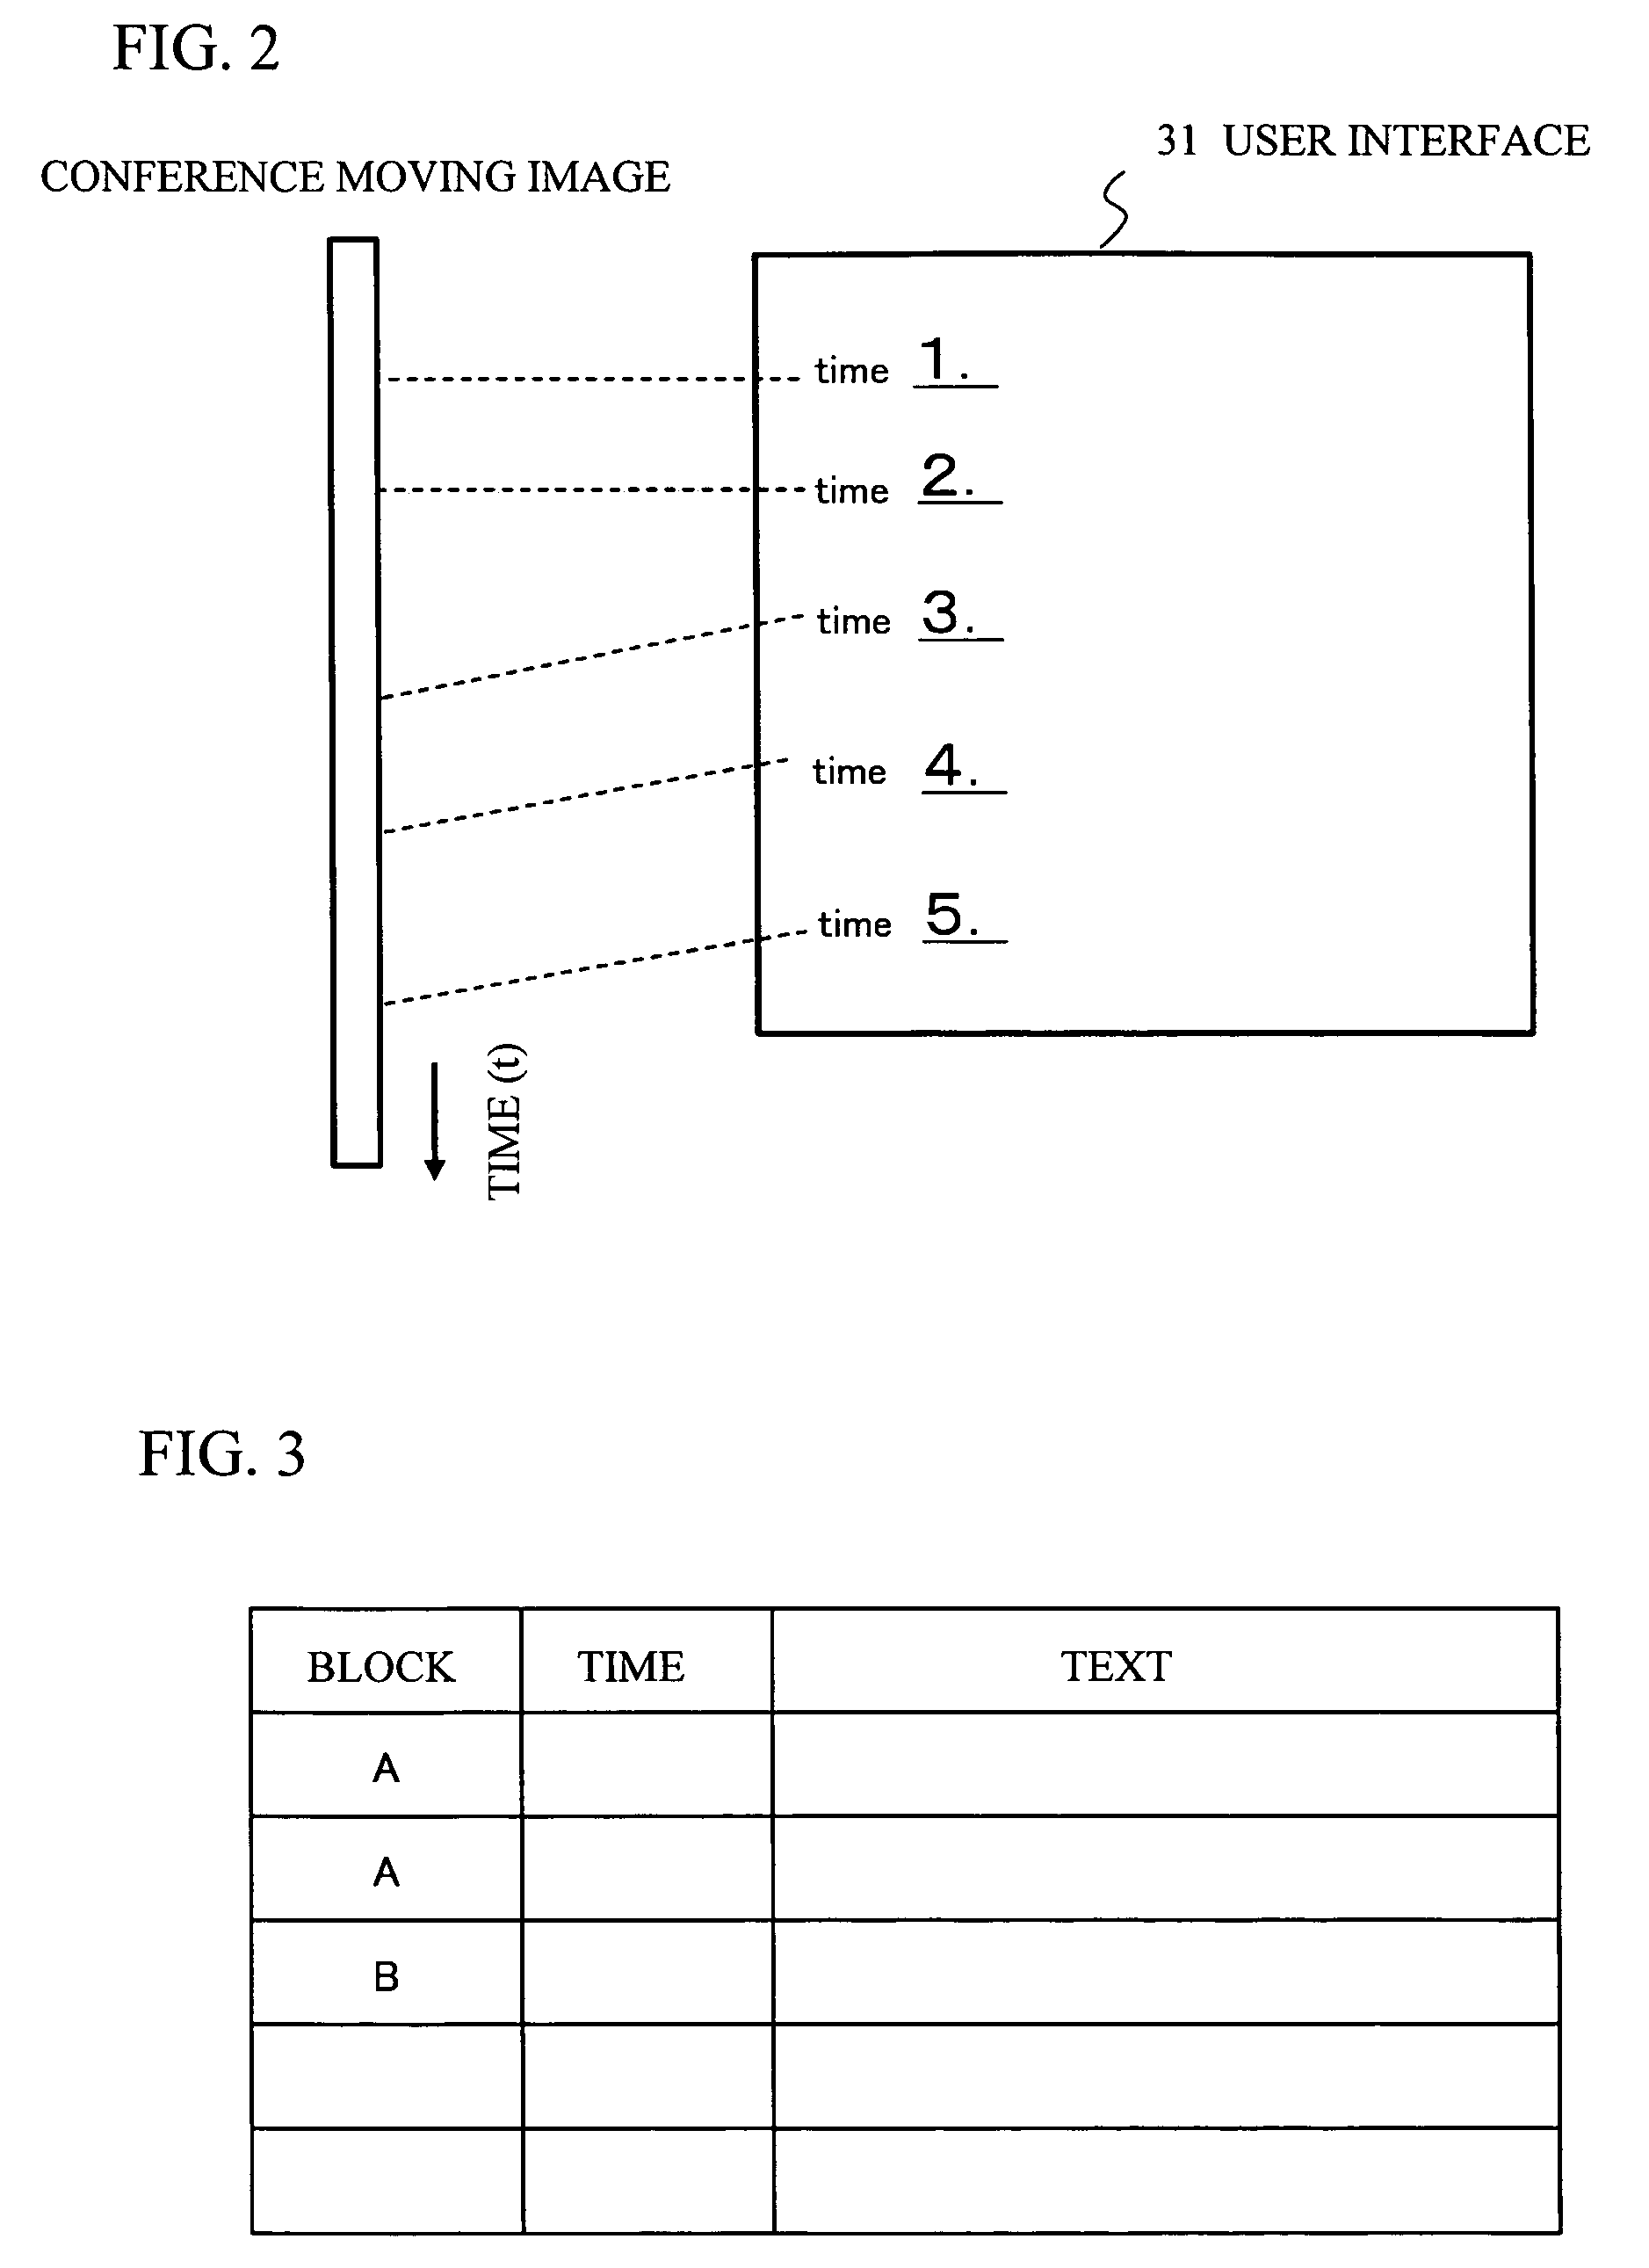 Minutes-creating support apparatus and method